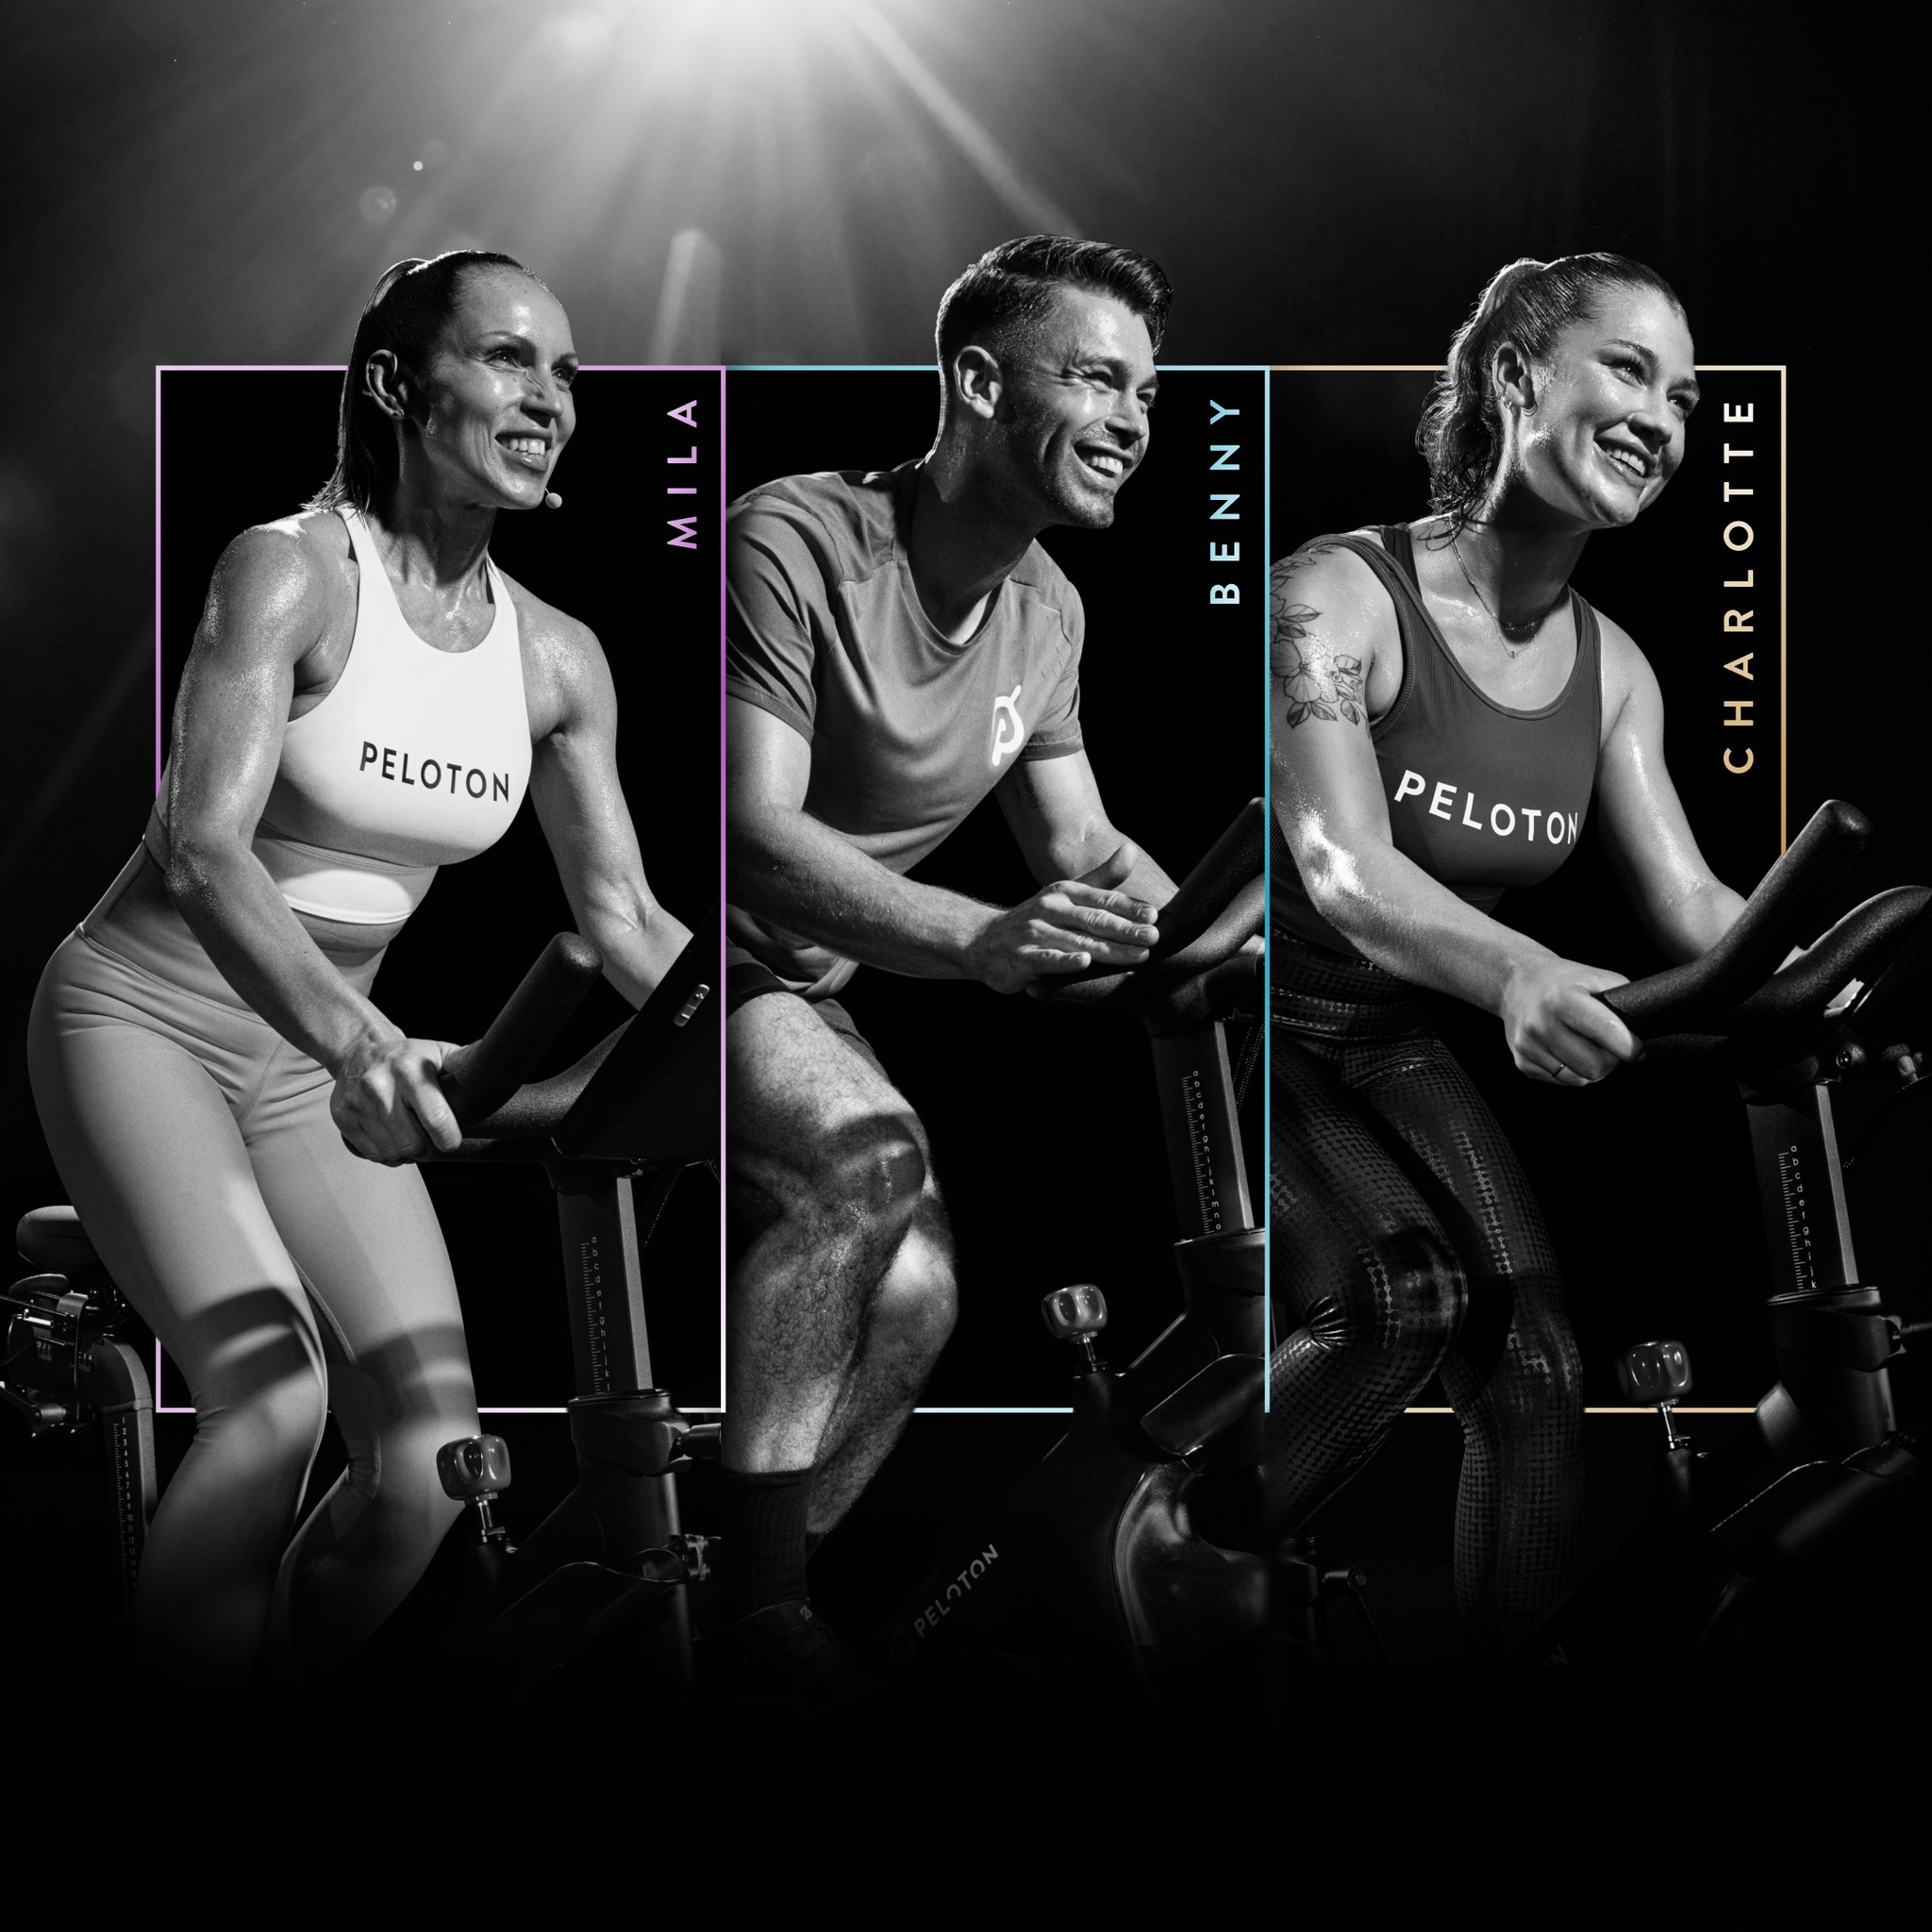 Peloton Announces Three New German Bike Instructors Mila Charlotte And Benny The Clip Out